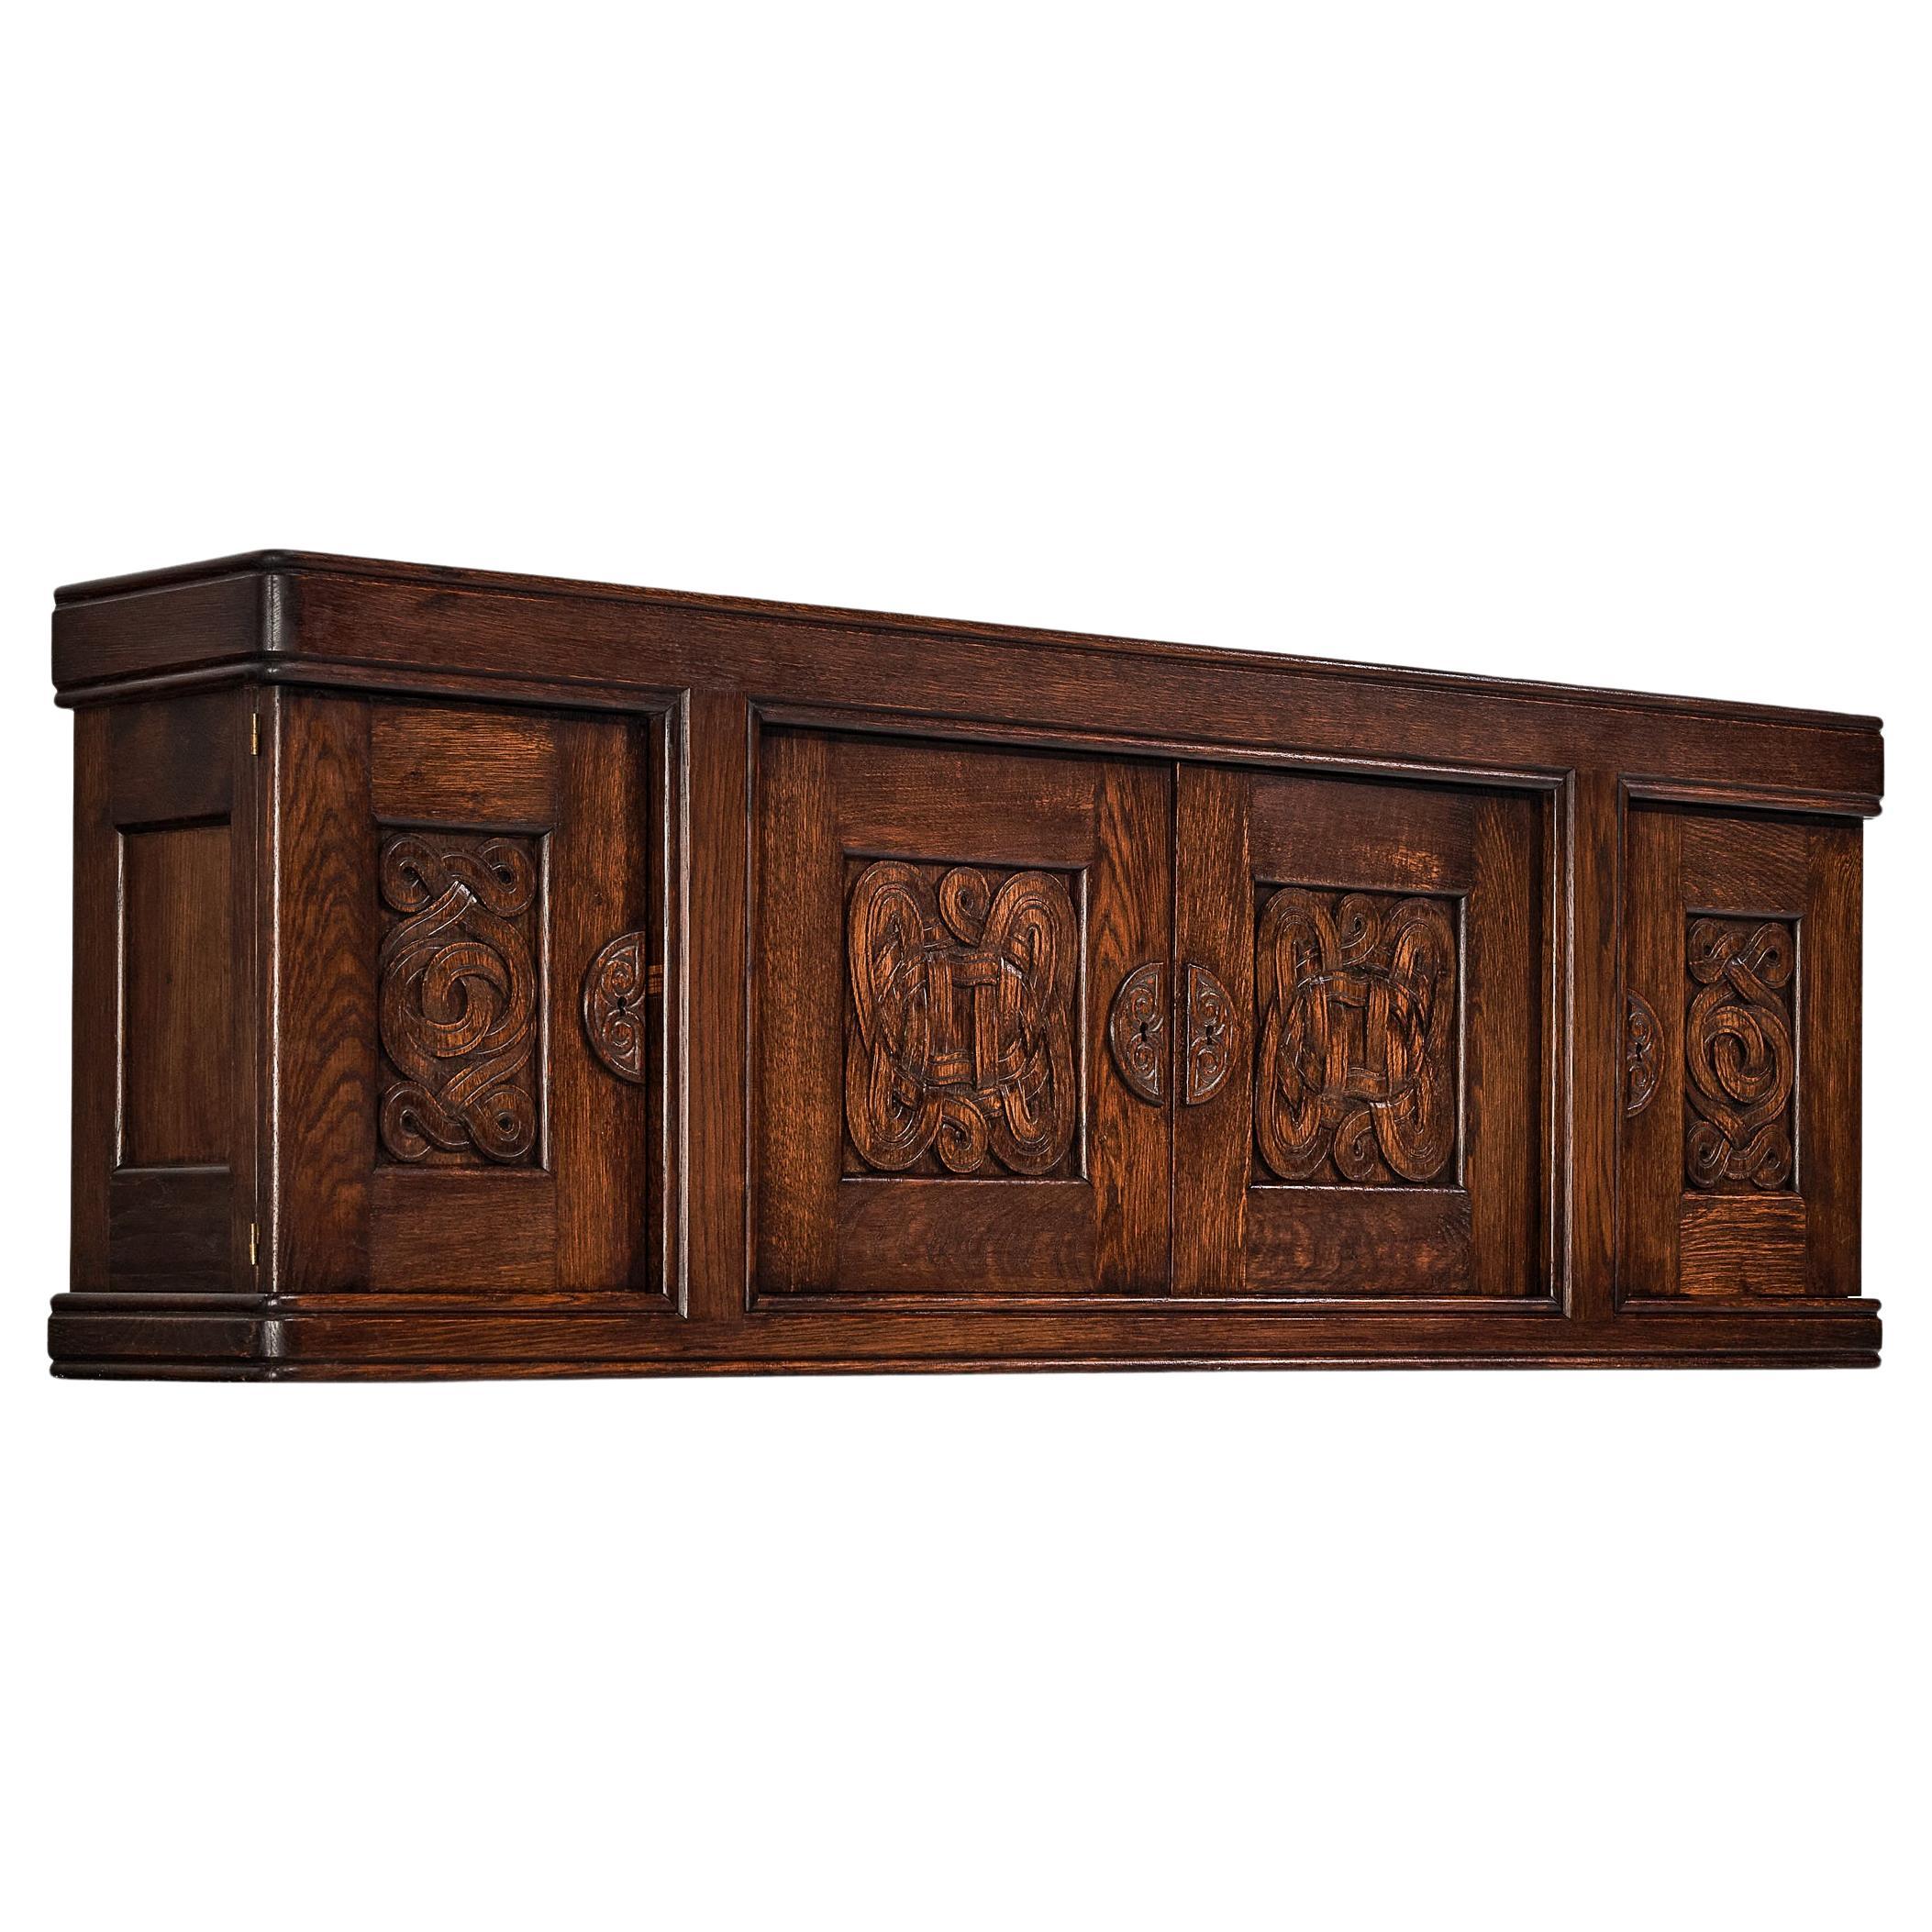 Joseph Savina Cabinet with Intricate Carvings in Oak  For Sale